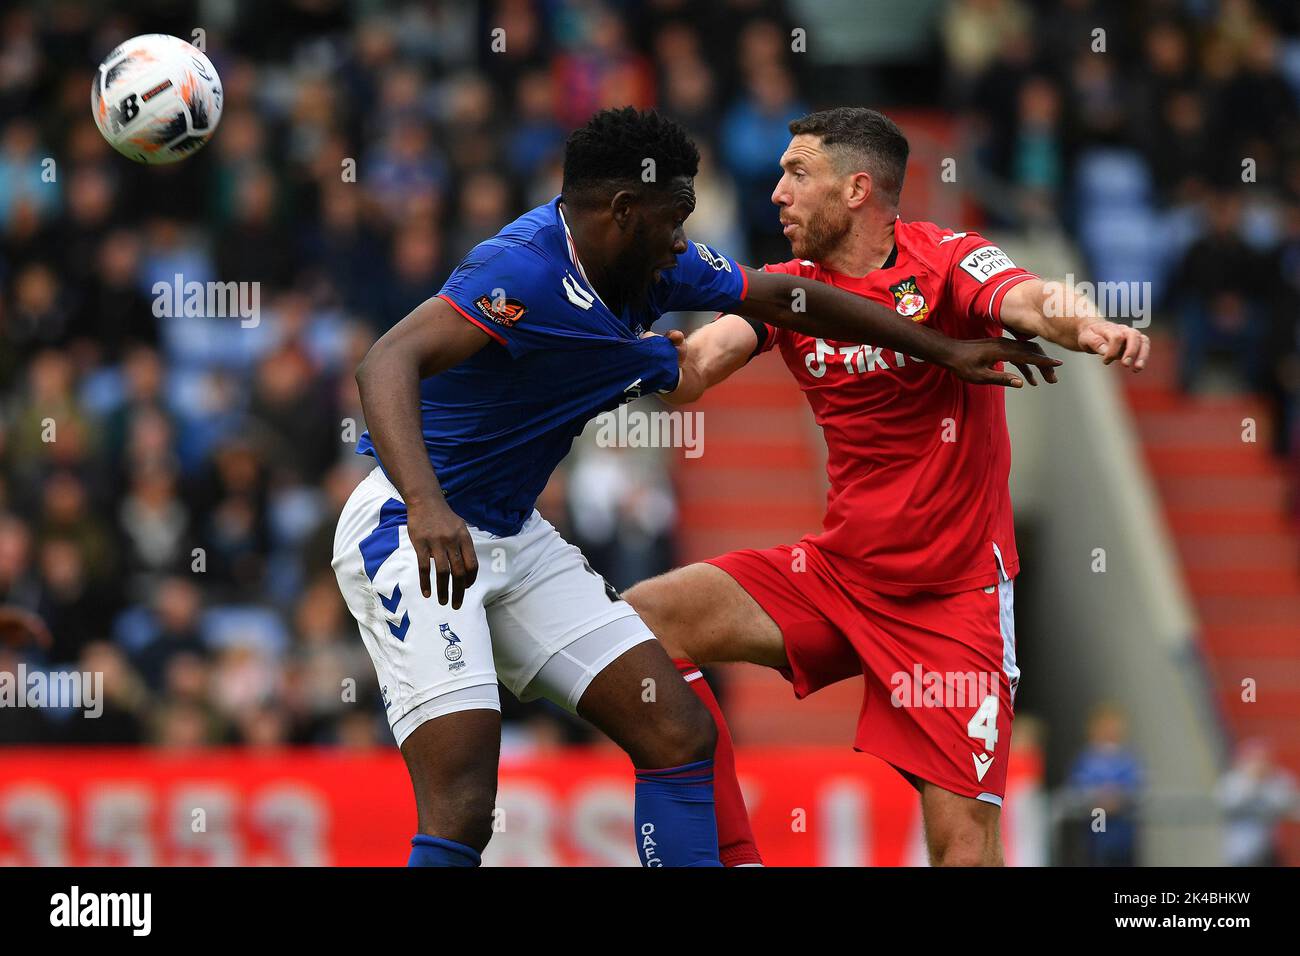 Oldham, UK. 1st October 2022during the Vanarama National League match between Oldham Athletic and Wrexham at Boundary Park, Oldham on Saturday 1st October 2022Mike Fondop-Talom of Oldham Athletic tussles with Ben Tozer of Wrexham Football Club during the Vanarama National League match between Oldham Athletic and Wrexham at Boundary Park, Oldham on Saturday 1st October 2022during the Vanarama National League match between Oldham Athletic and Wrexham at Boundary Park, Oldham on Saturday 1st October 2022. Credit: MI News & Sport /Alamy Live News Stock Photo